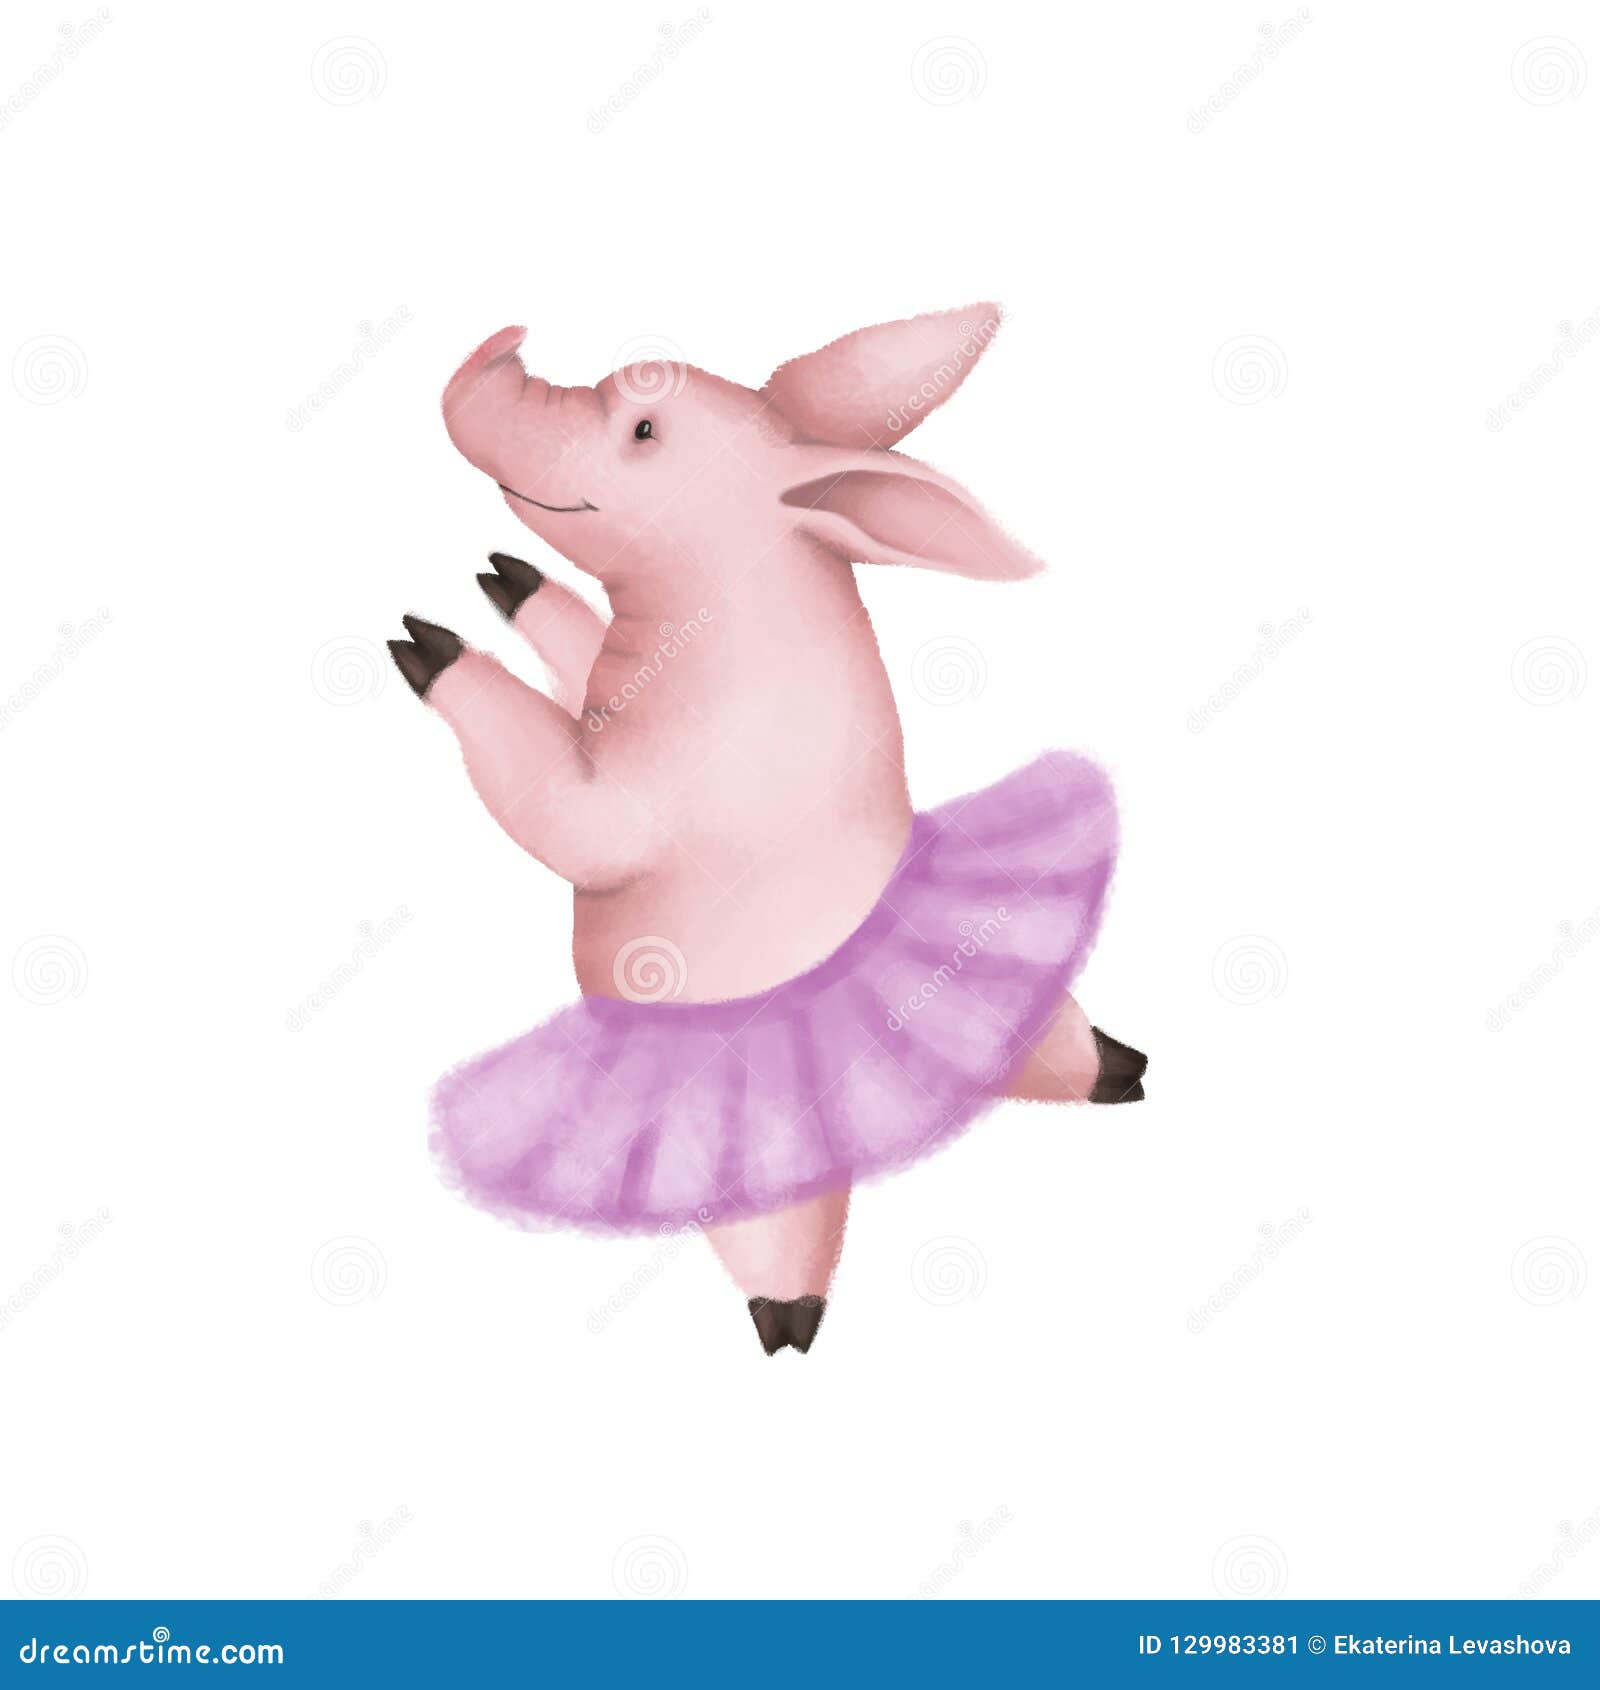 Cute Pink Pig Ballerina. in a Pink Skirt Dancing. Isolated on White Background. Symbol 2019 Stock Illustration - Illustration of woolen, 129983381